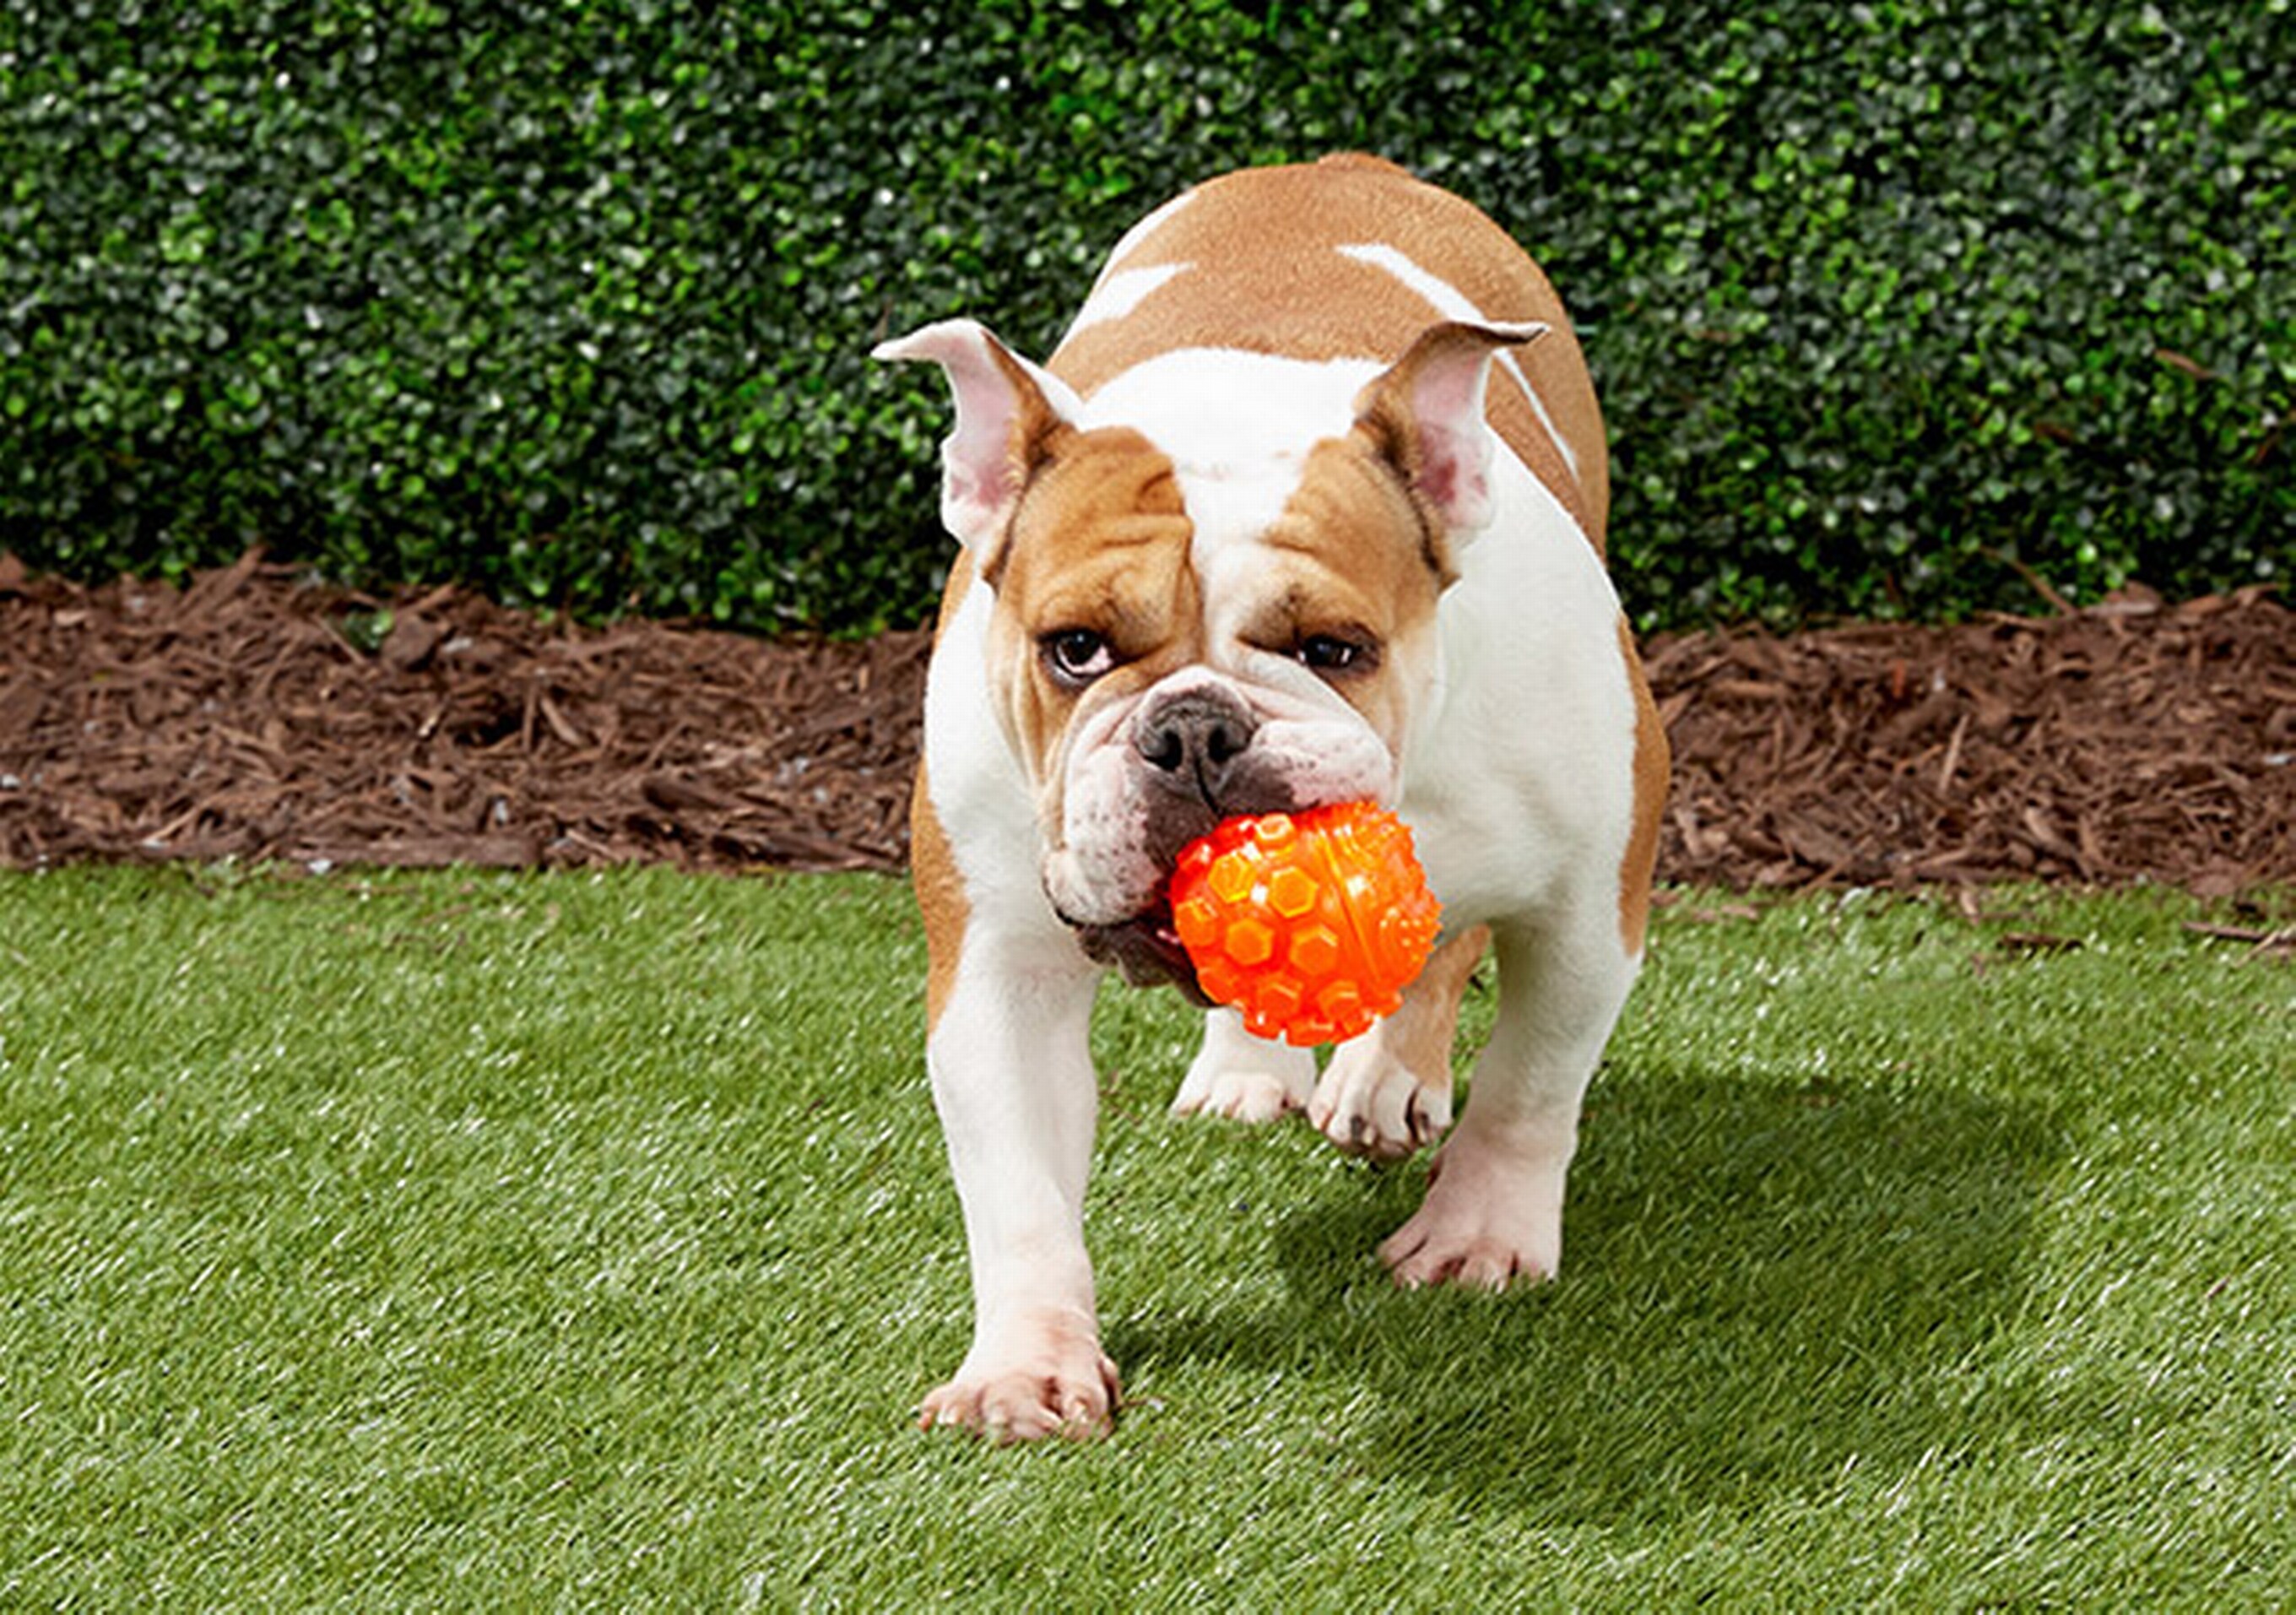 Go-Frrr Ball Medium LAUNCHER FLOAT Fetch Flying Rubber Water play Pet Dog toy 